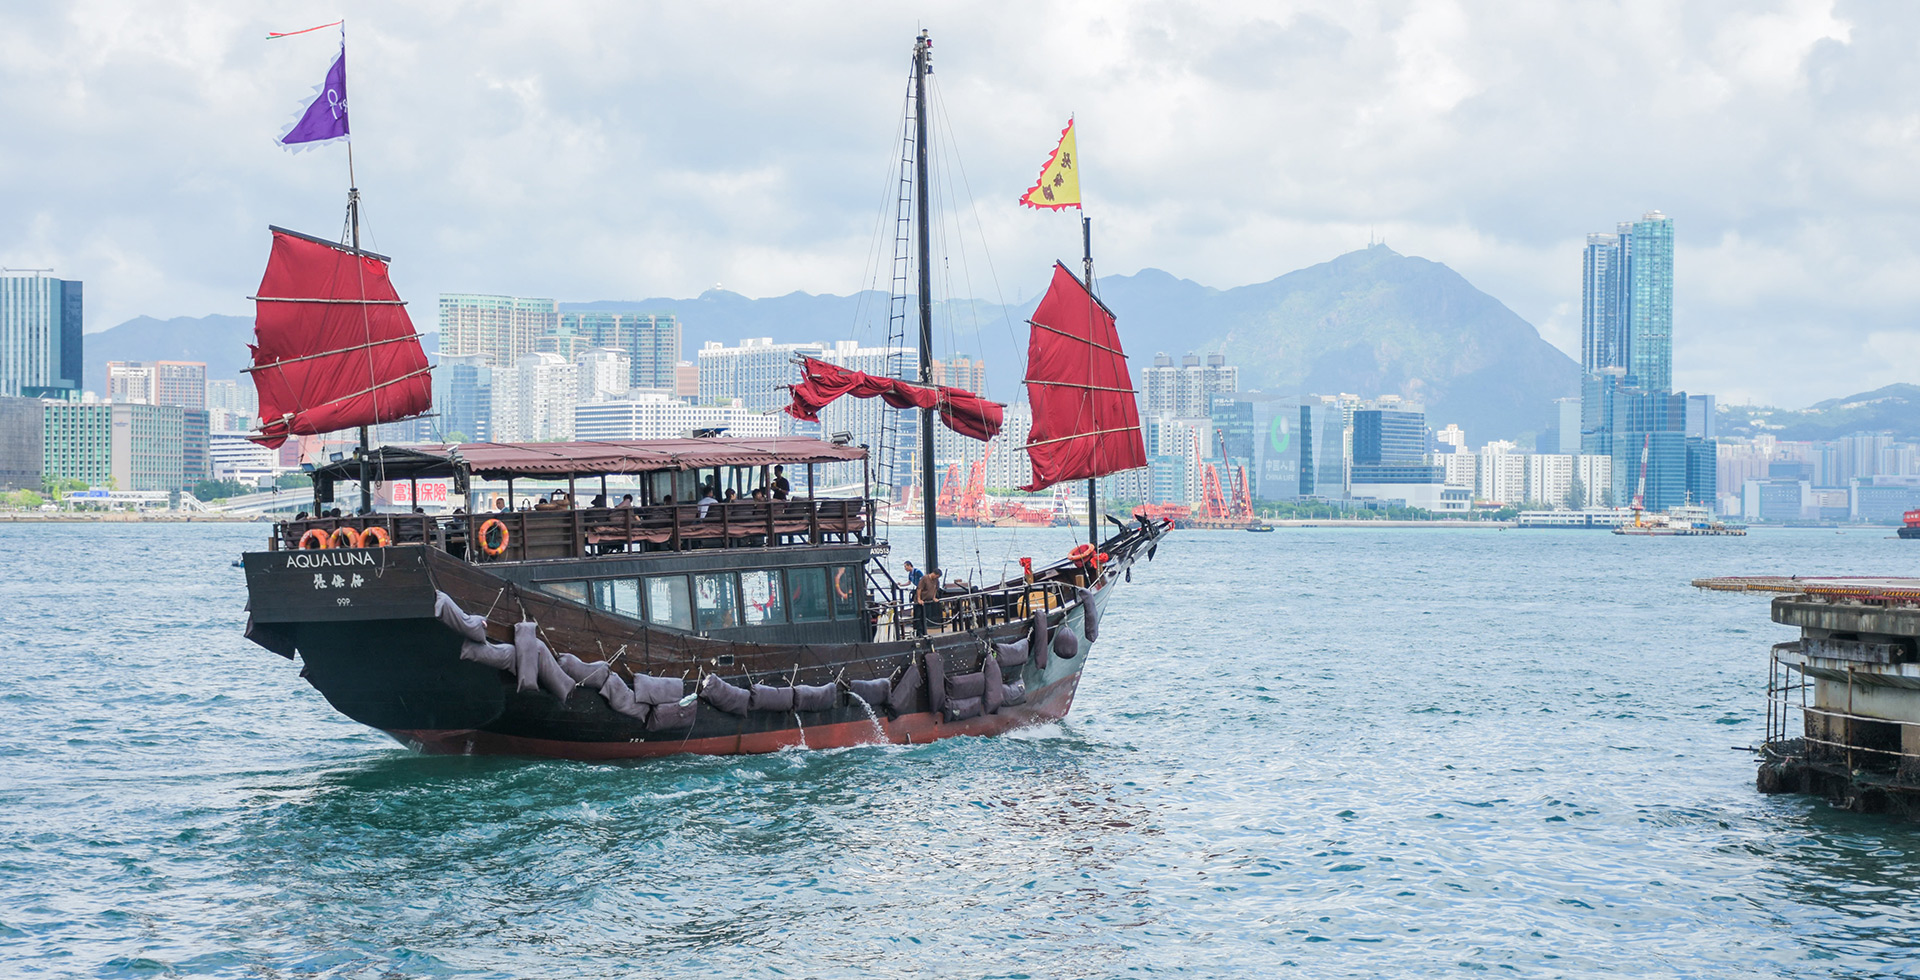 6 takeaways from our Hong Kong Investment Forum